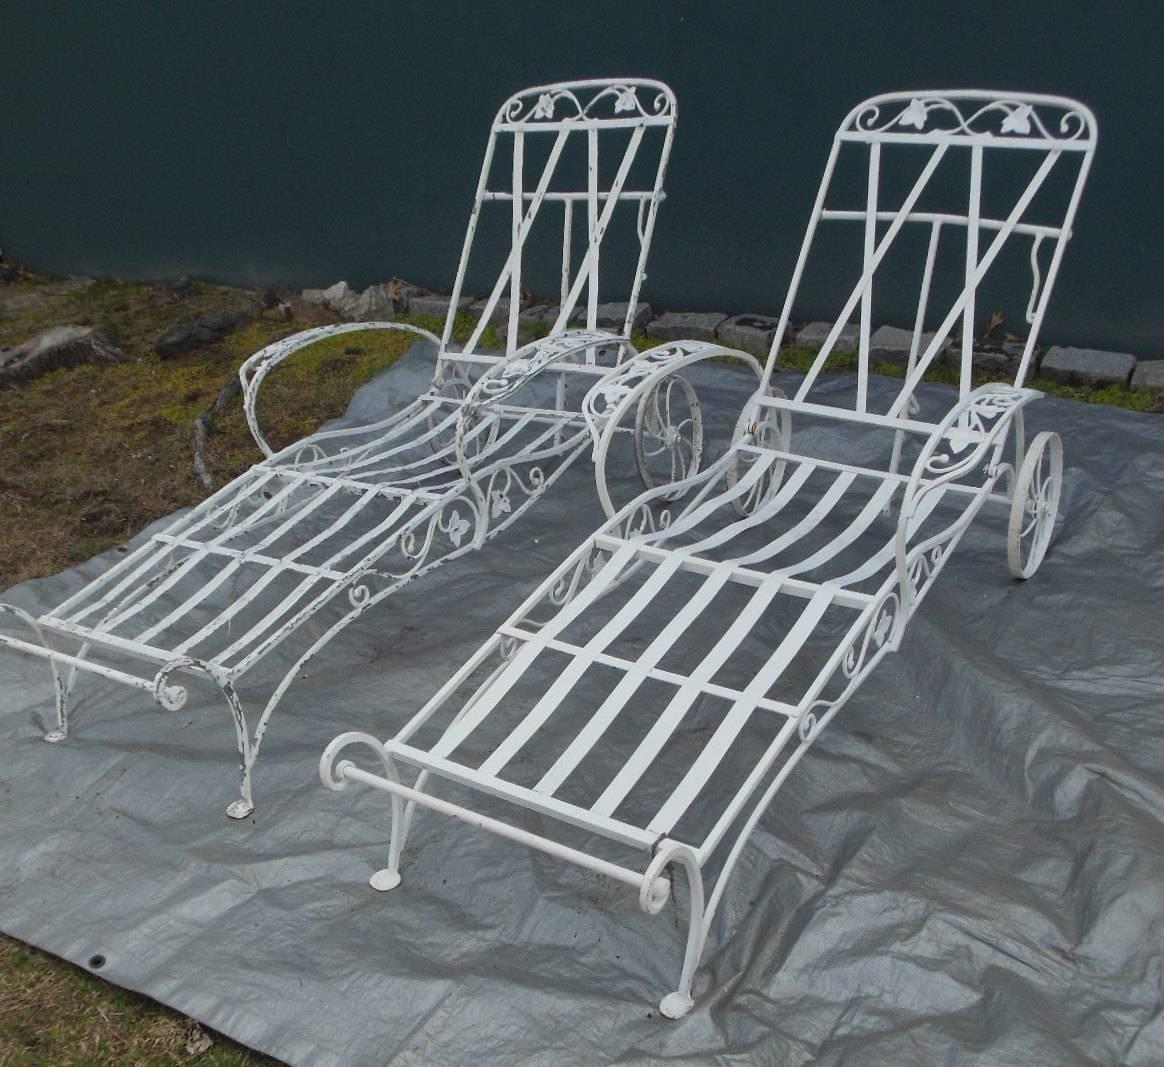 American Salterini Chaise Lounges, Mt Vernon Pattern in Wrought Iron (4) available For Sale